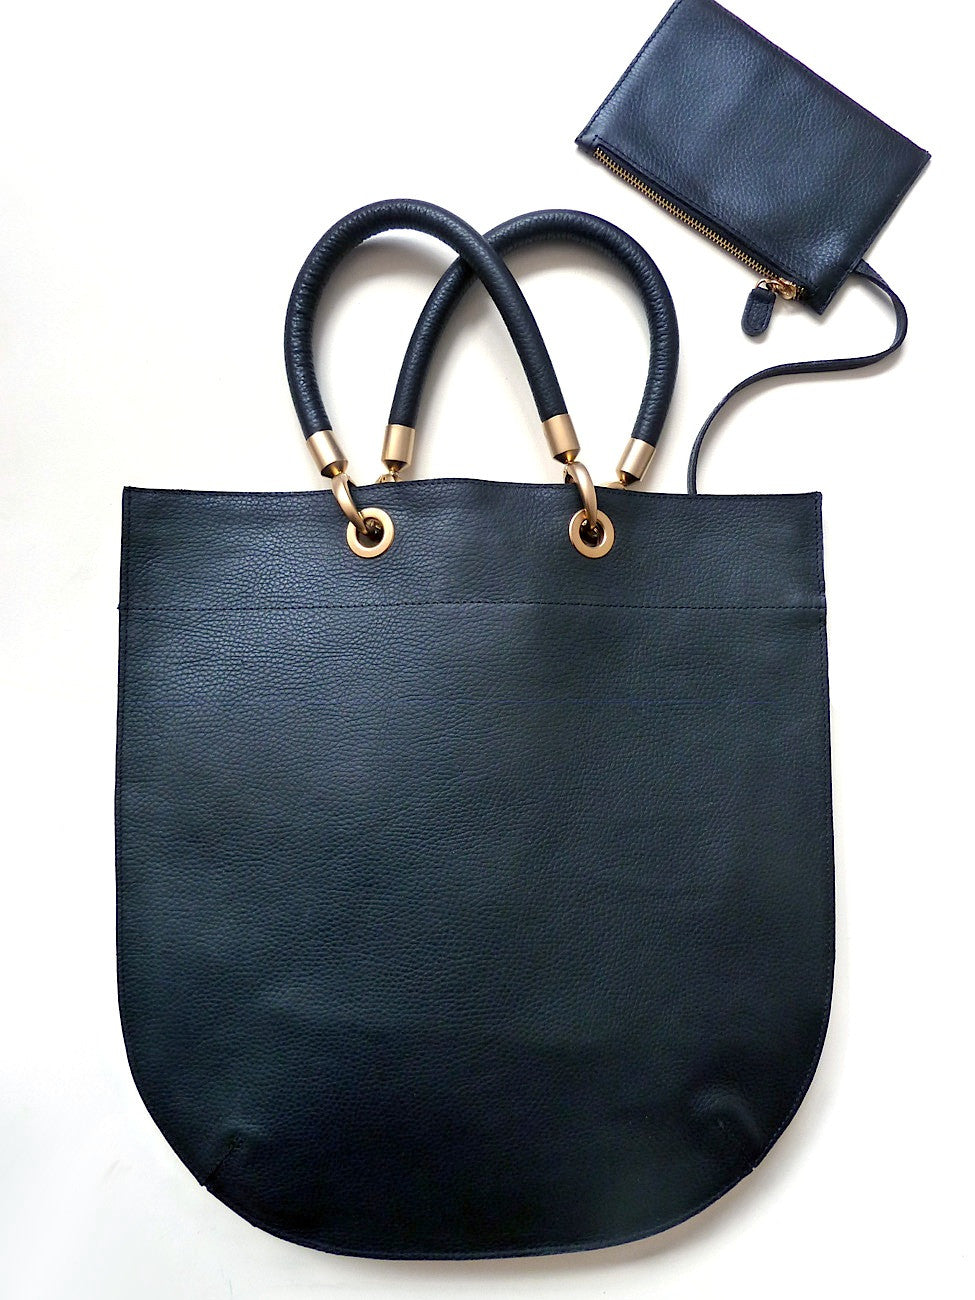 handle leather tote